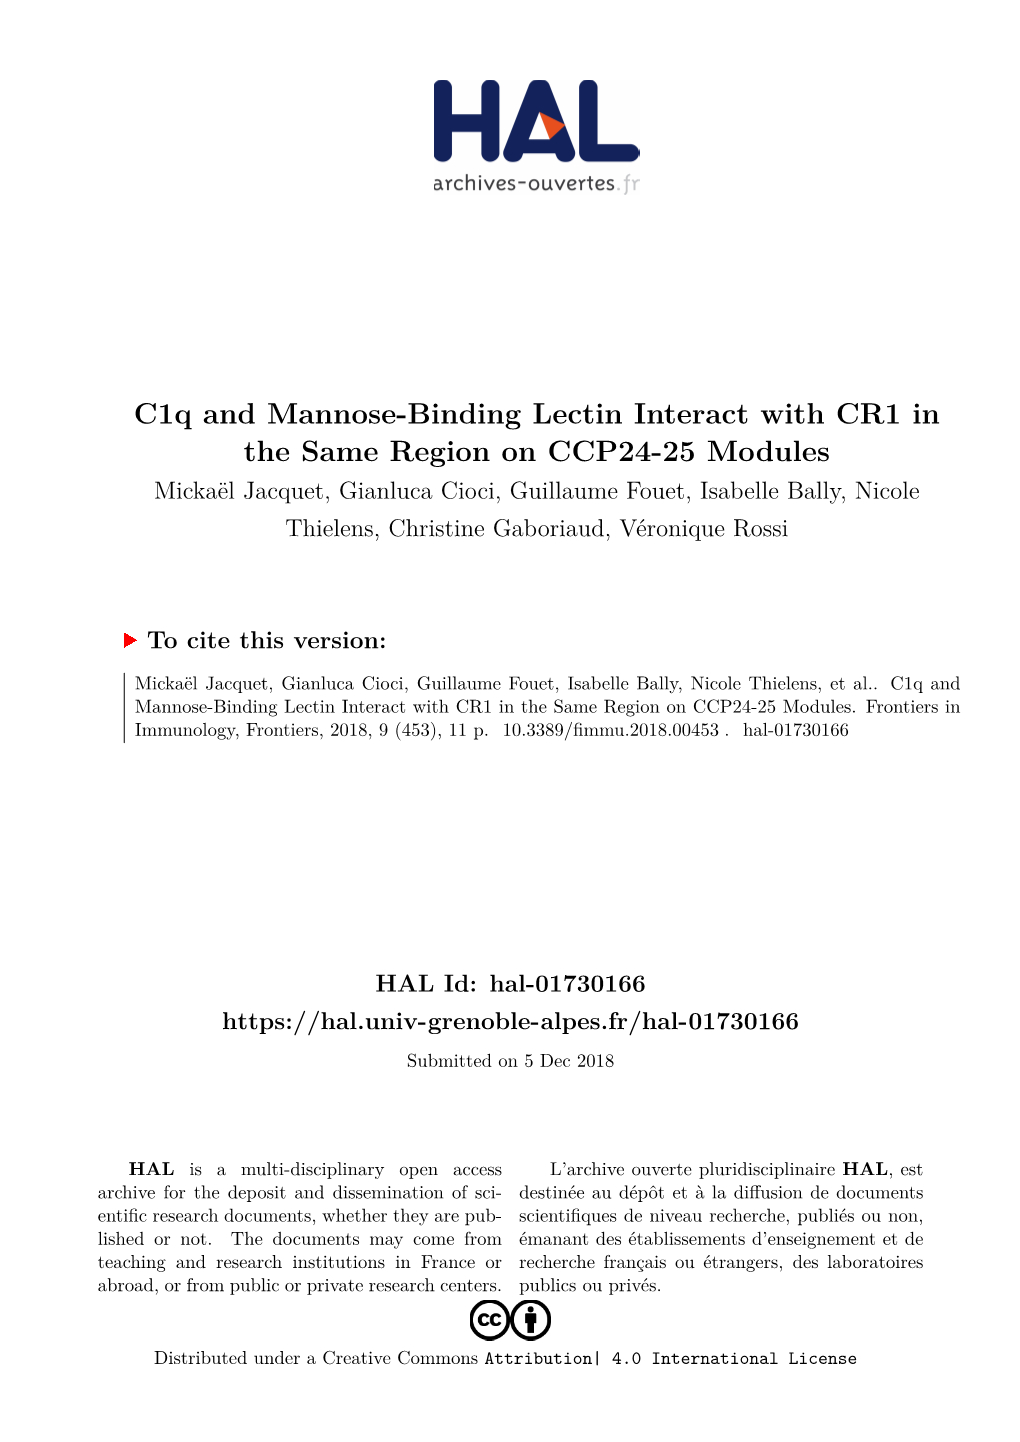 C1q and Mannose-Binding Lectin Interact with CR1 in The